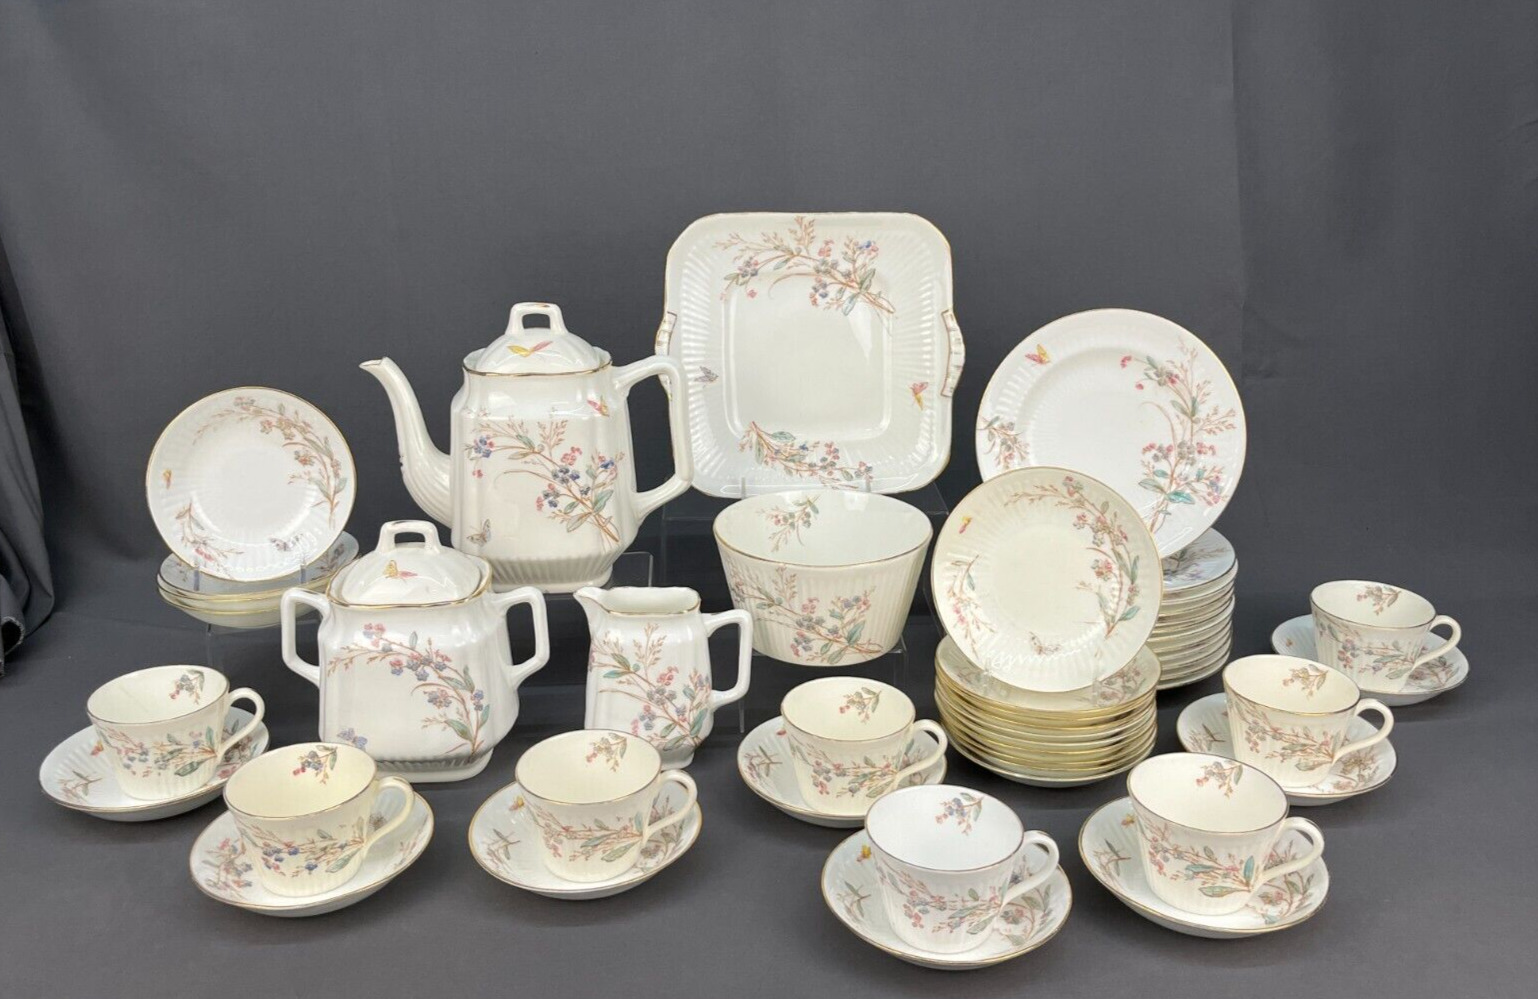 47 Pc 19th Century Hand-Painted Floral and Butterfly Dessert Set (259)